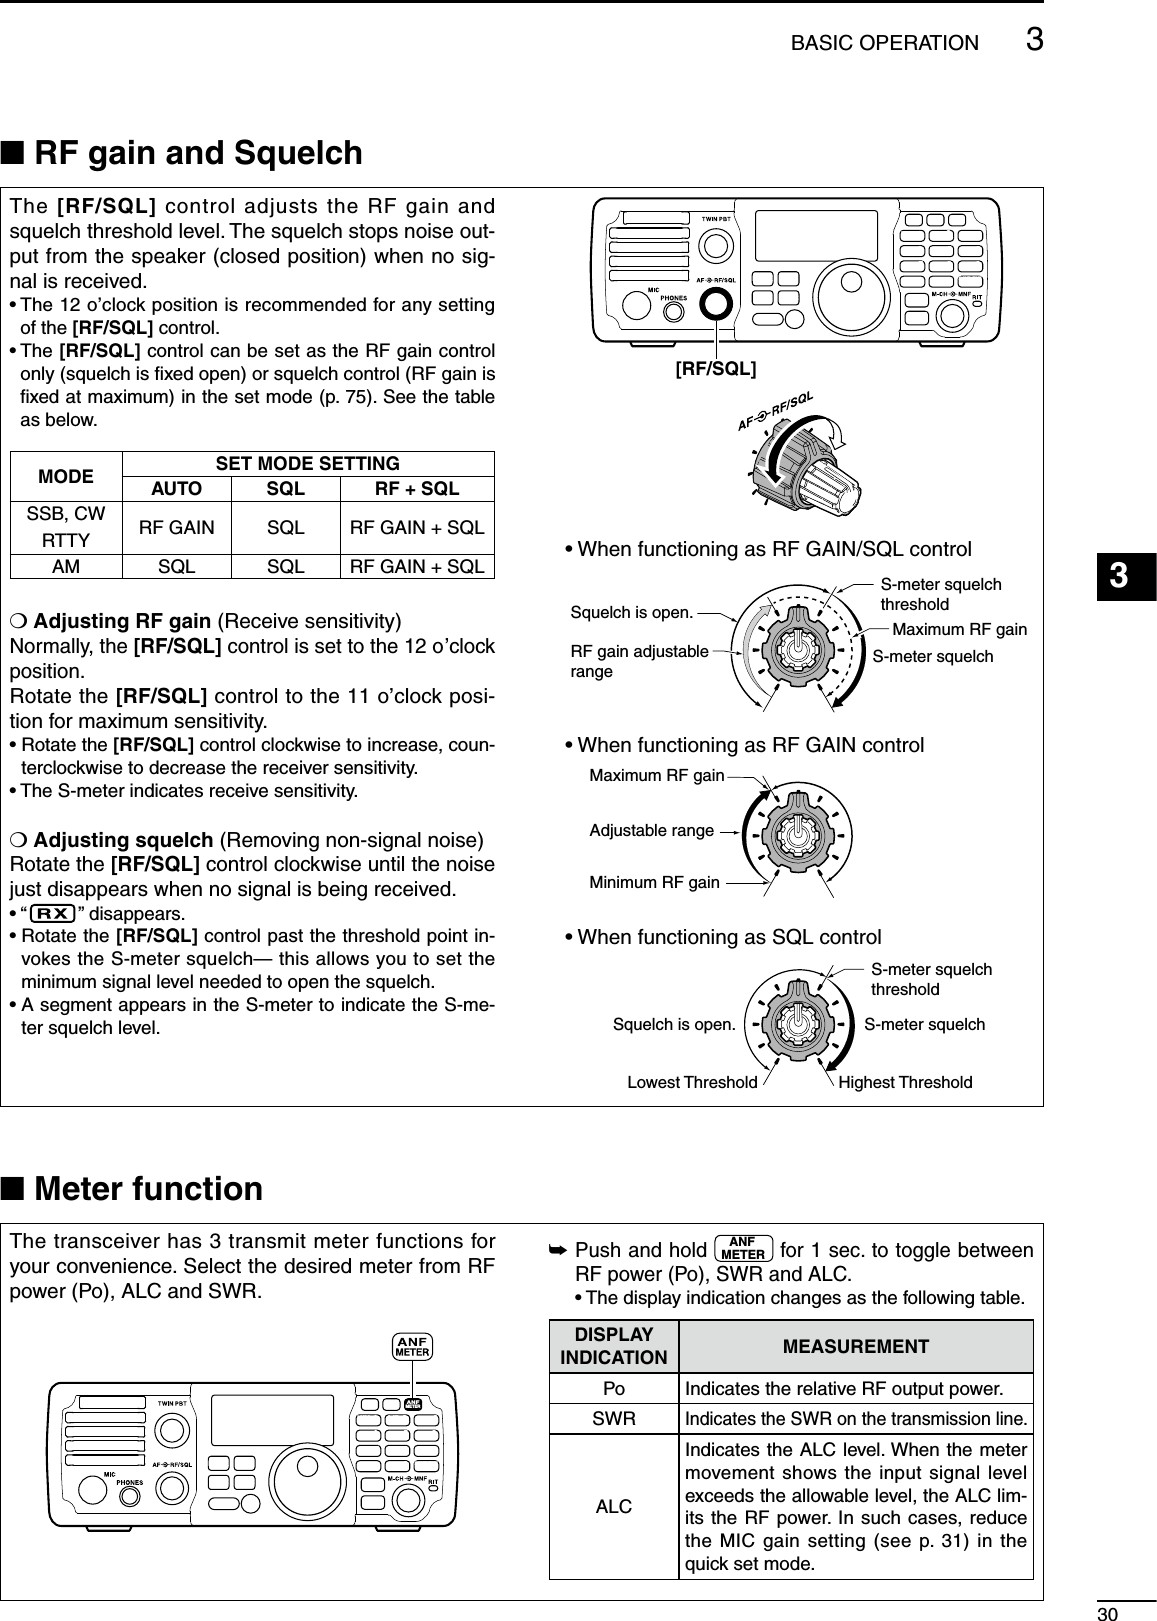 Page 35 of HF 50 MHz Transceiver User Manual IC 718 Instruction Manual